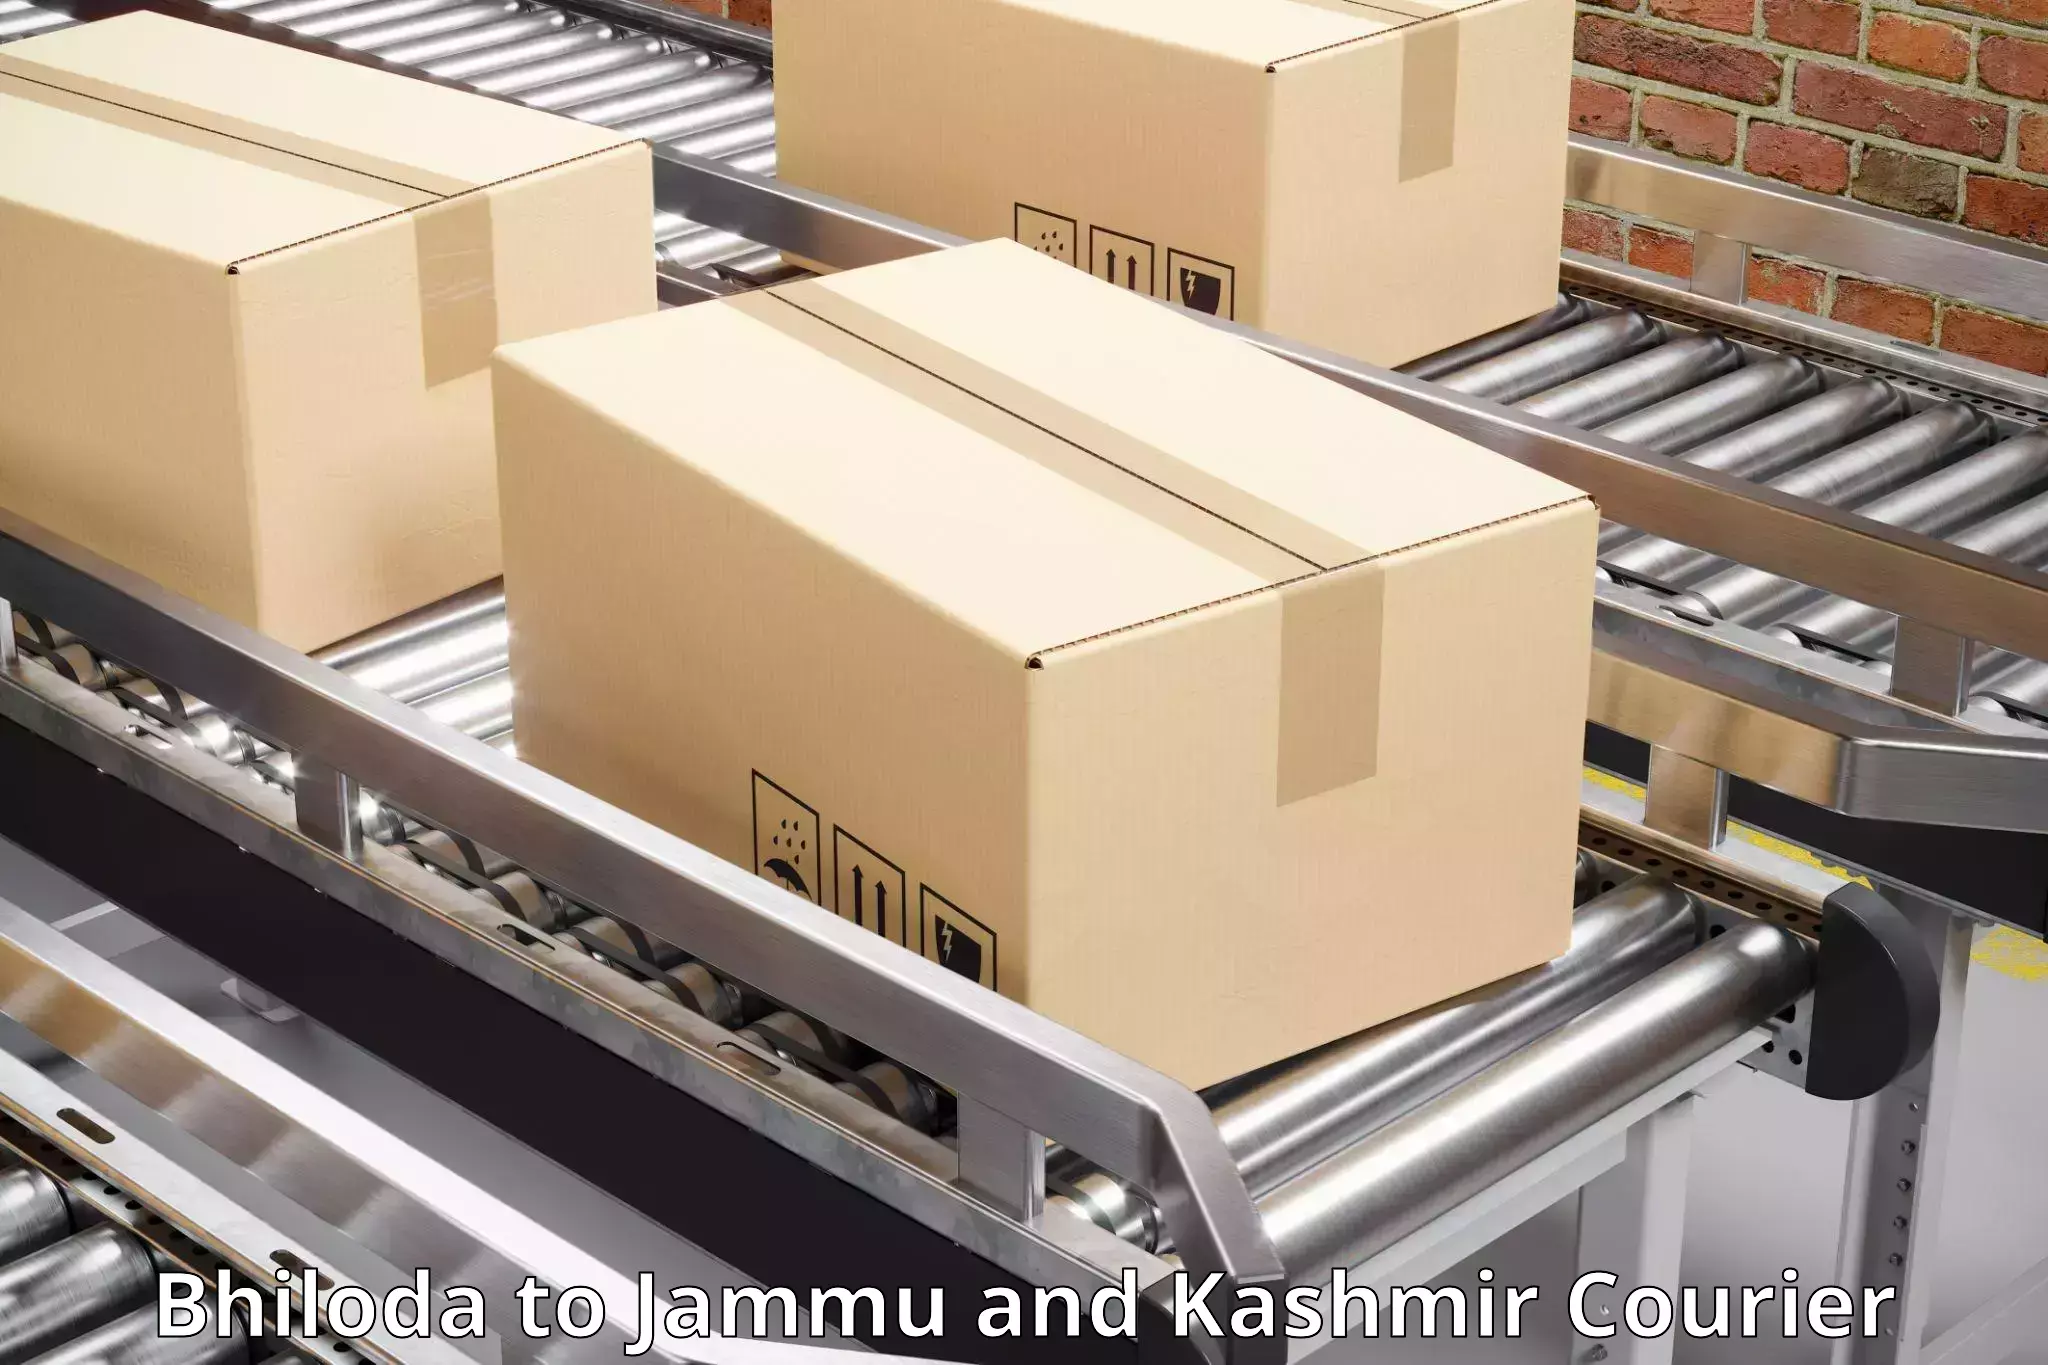 Multi-national courier services Bhiloda to Baramulla